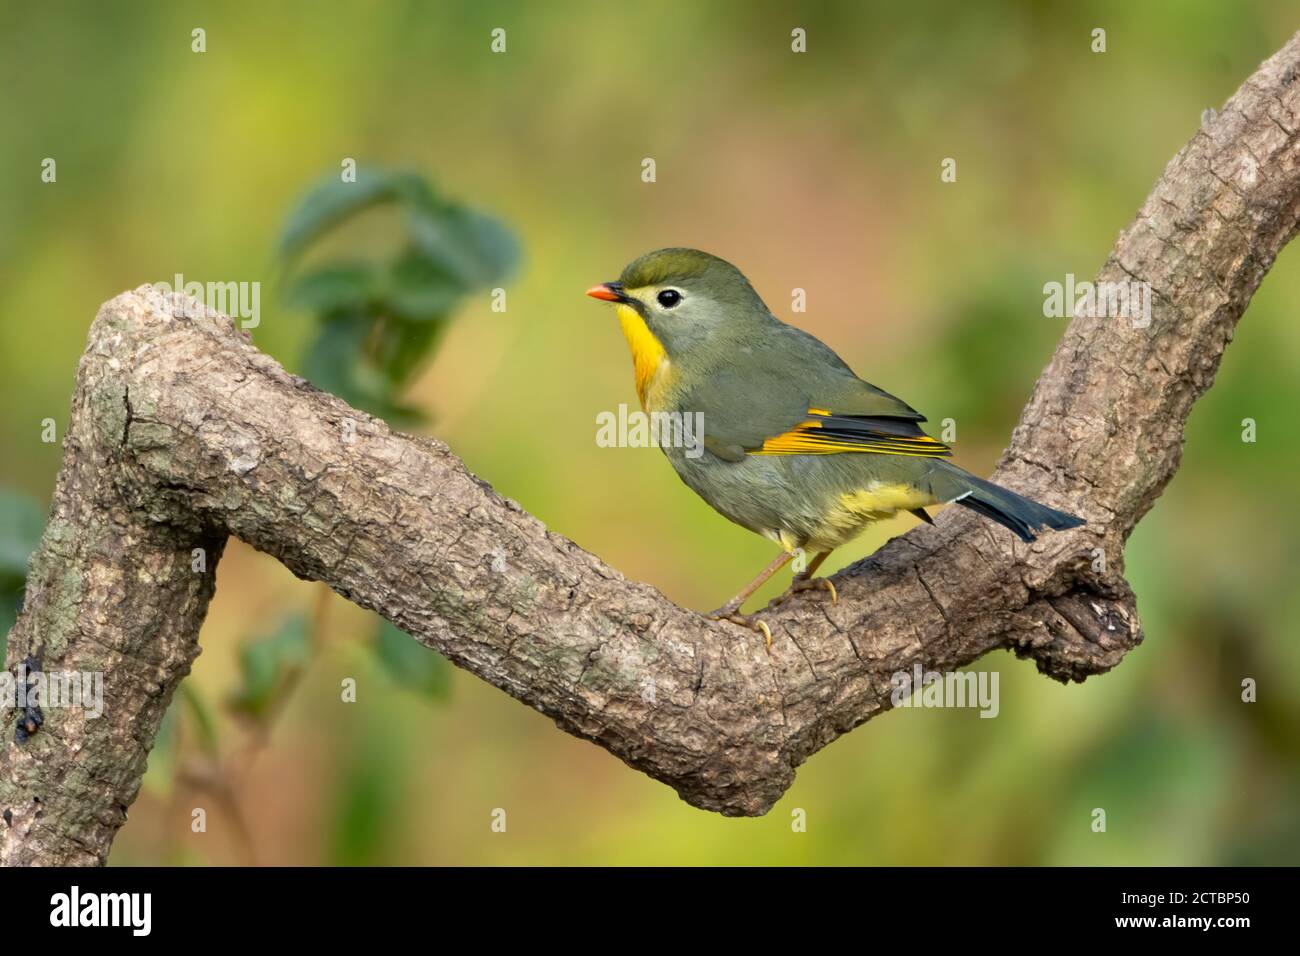 Cute little Red-billed Leiothrix (Leiothrix lutea), perched on a branch in the forests of Sattal in Uttarakhand, India. Stock Photo